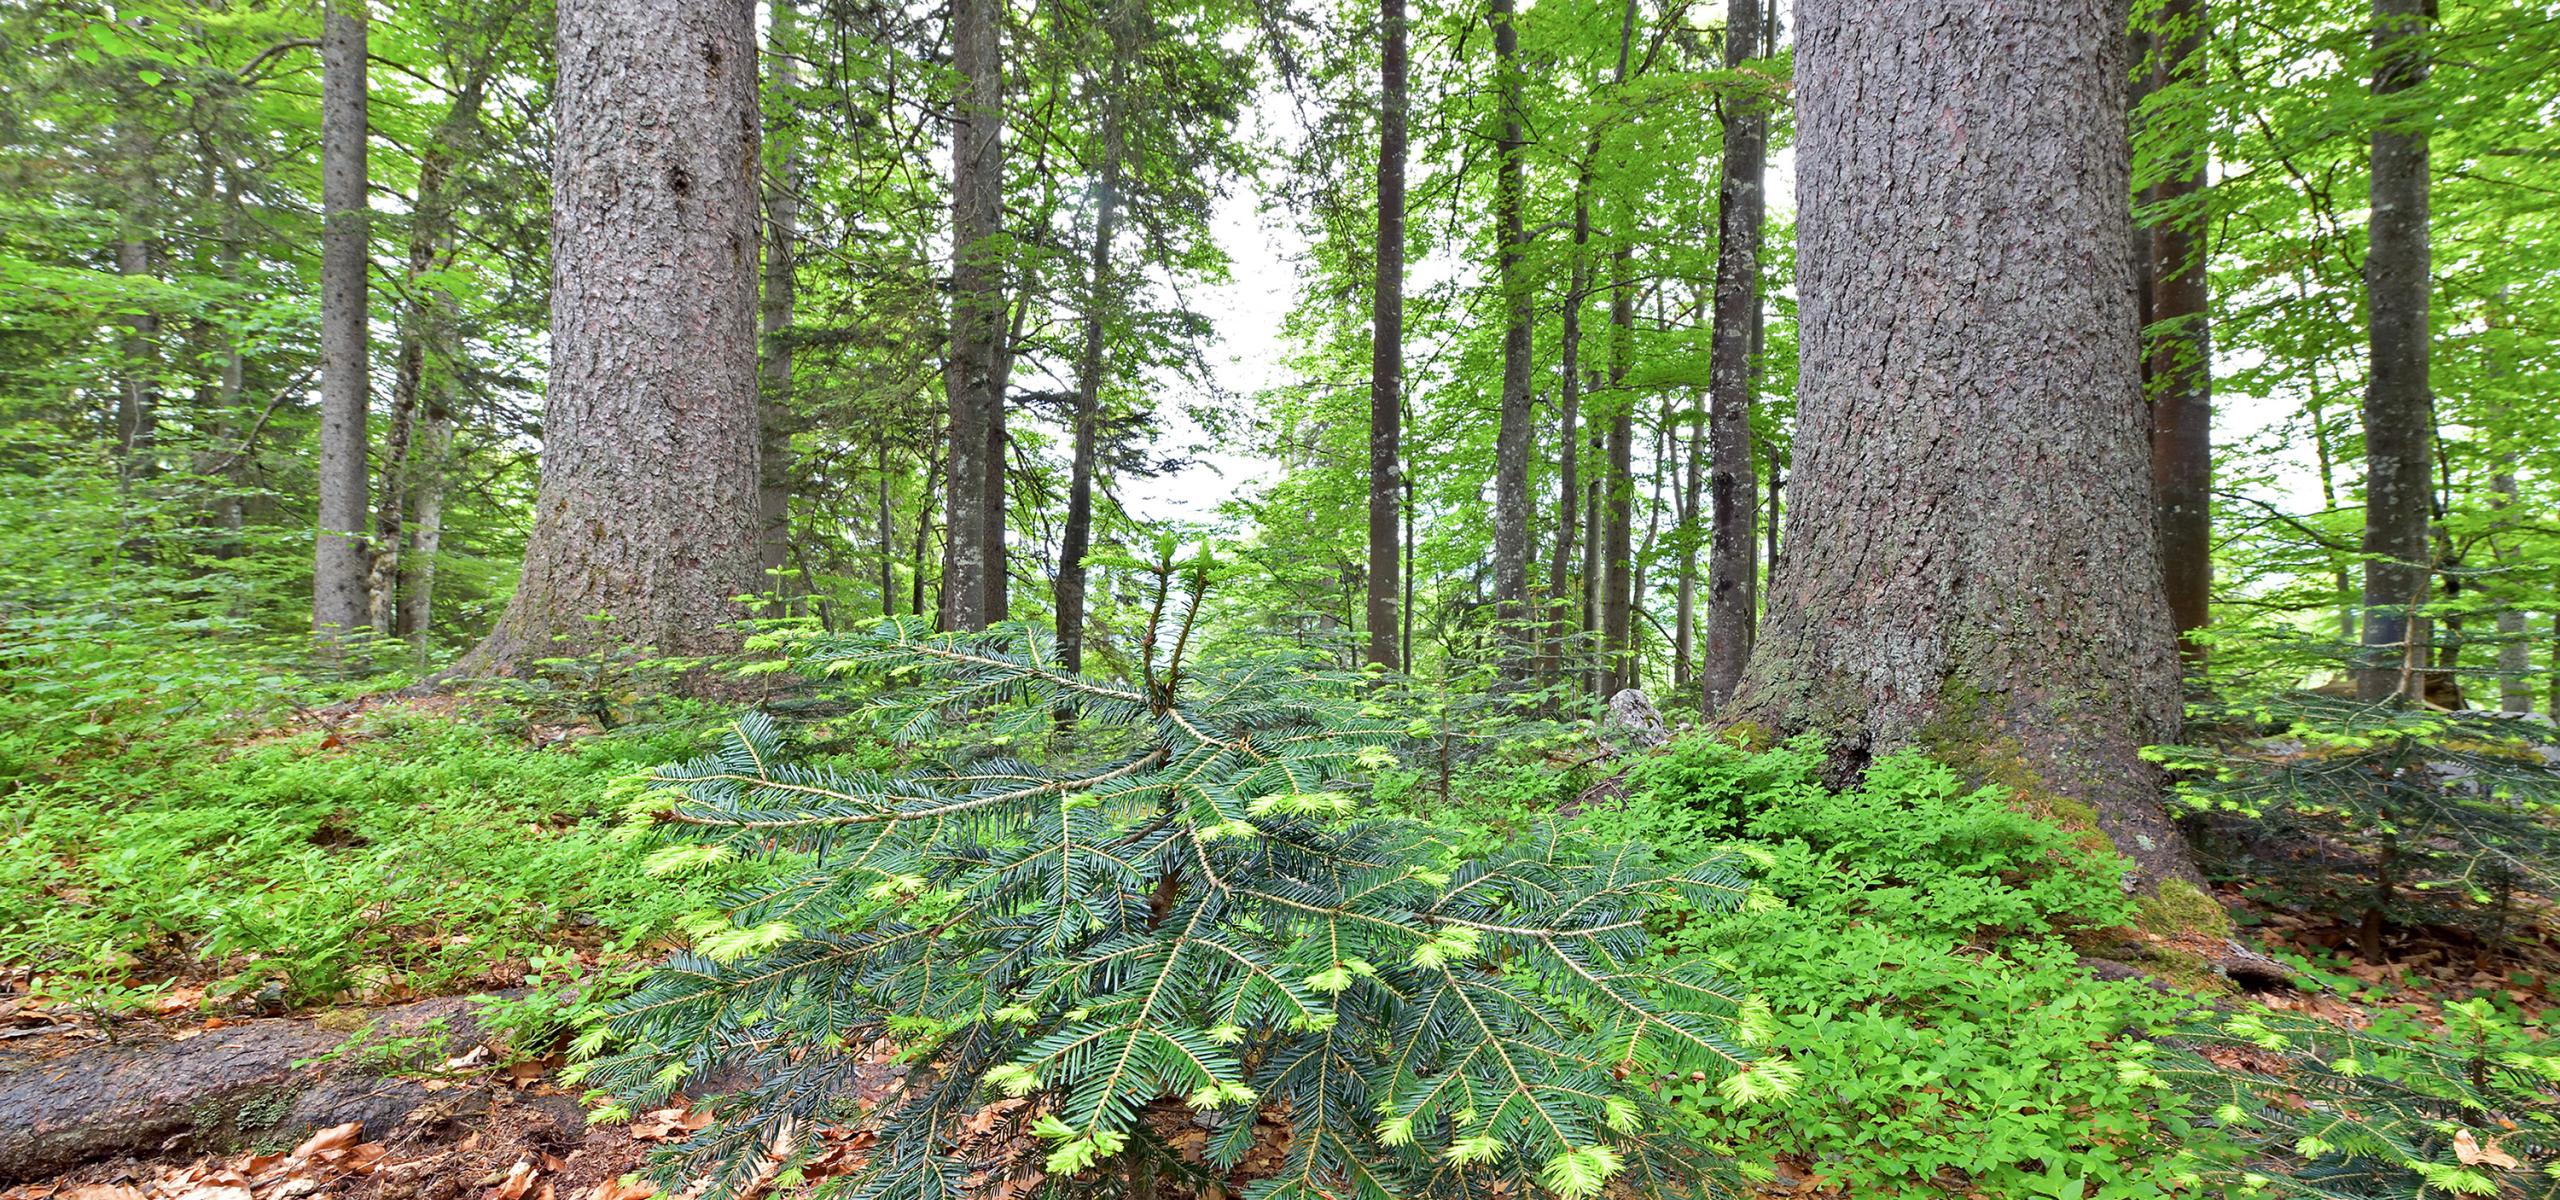 Spruce and fir trees with fresh shoots behind beech trees with delicate spring foliage